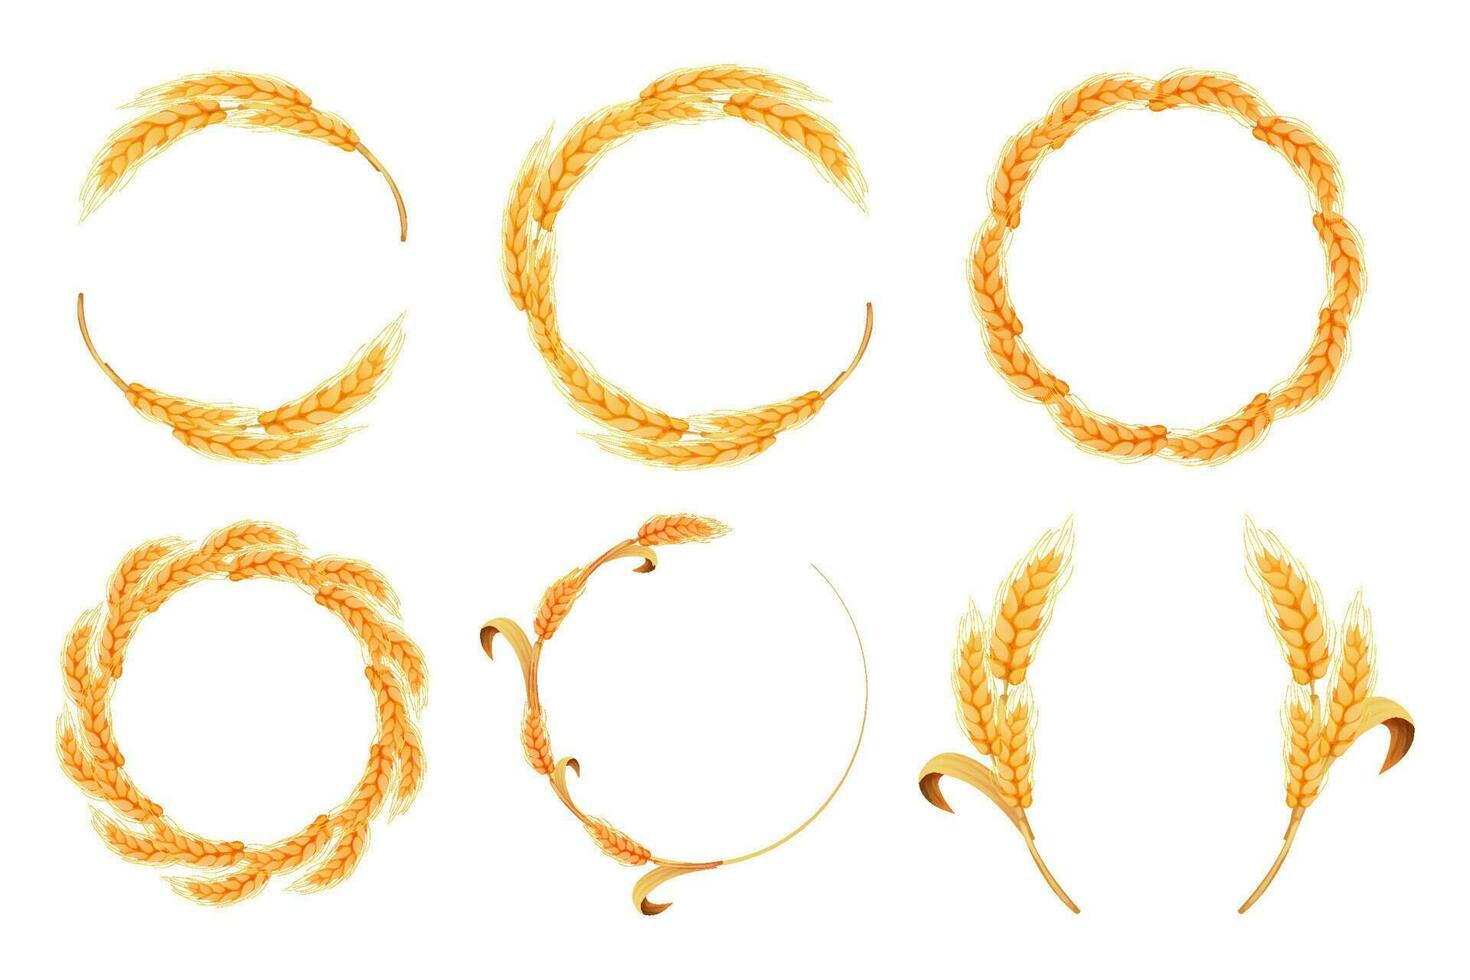 Set Wreath from spikelet, frame, border golden color wheat circle in cartoon style isolated on white background. For bakery, tags or labels. Vector illustration